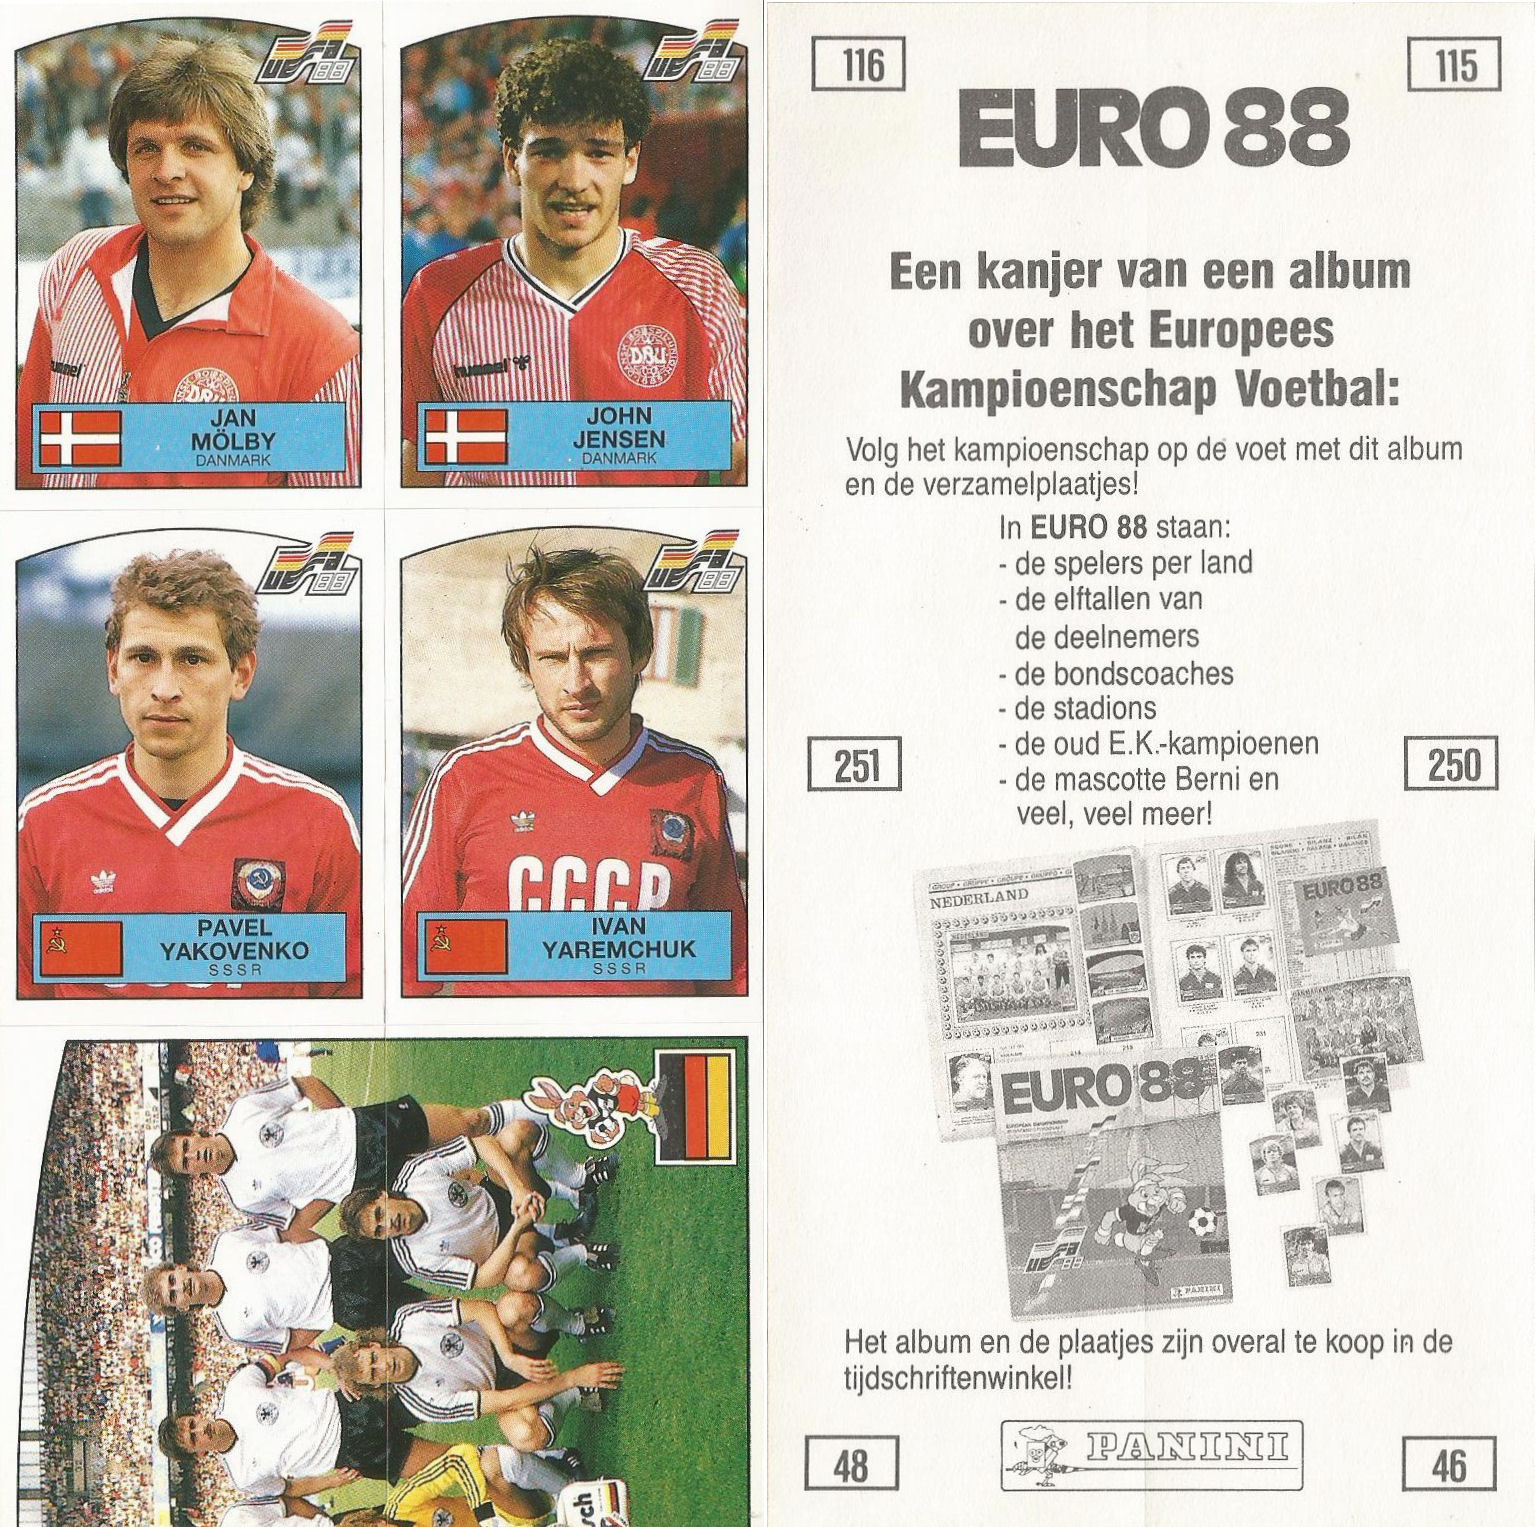 52 DEUTSCHLAND IMMEL WITH BACK VERY GOOD/MINT CONDITION Panini EURO 88 N 